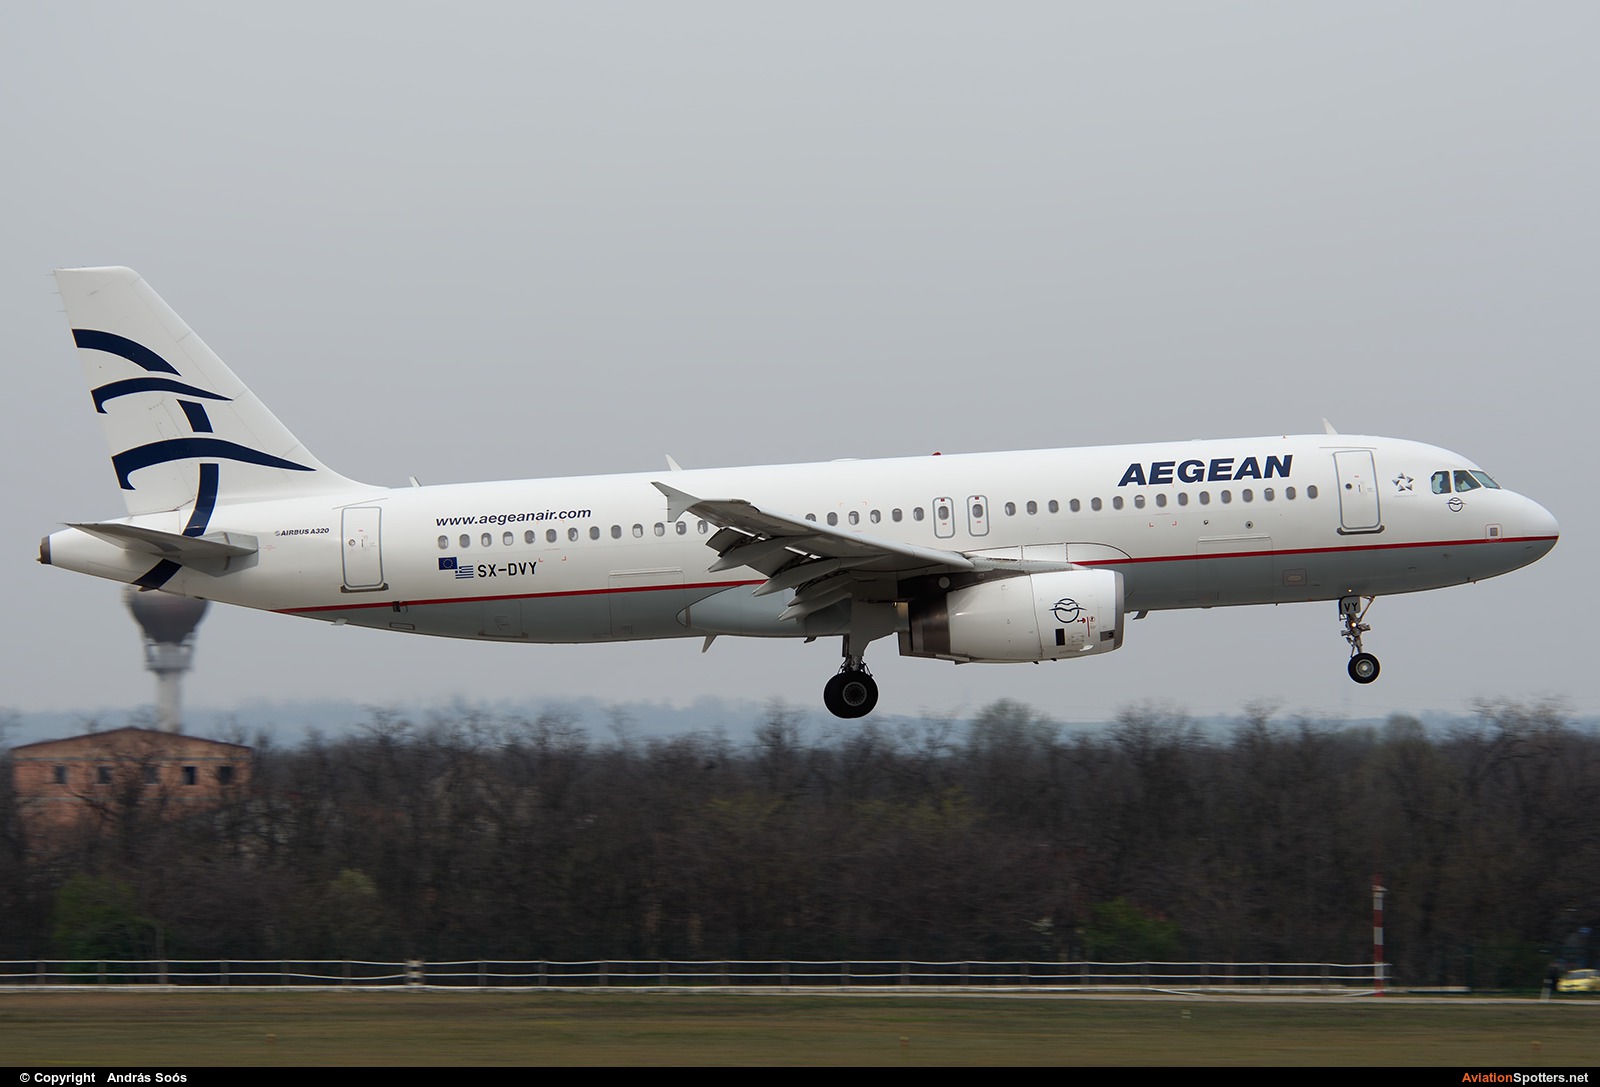 Aegean Airlines  -  A320  (SX-DVY) By András Soós (sas1965)